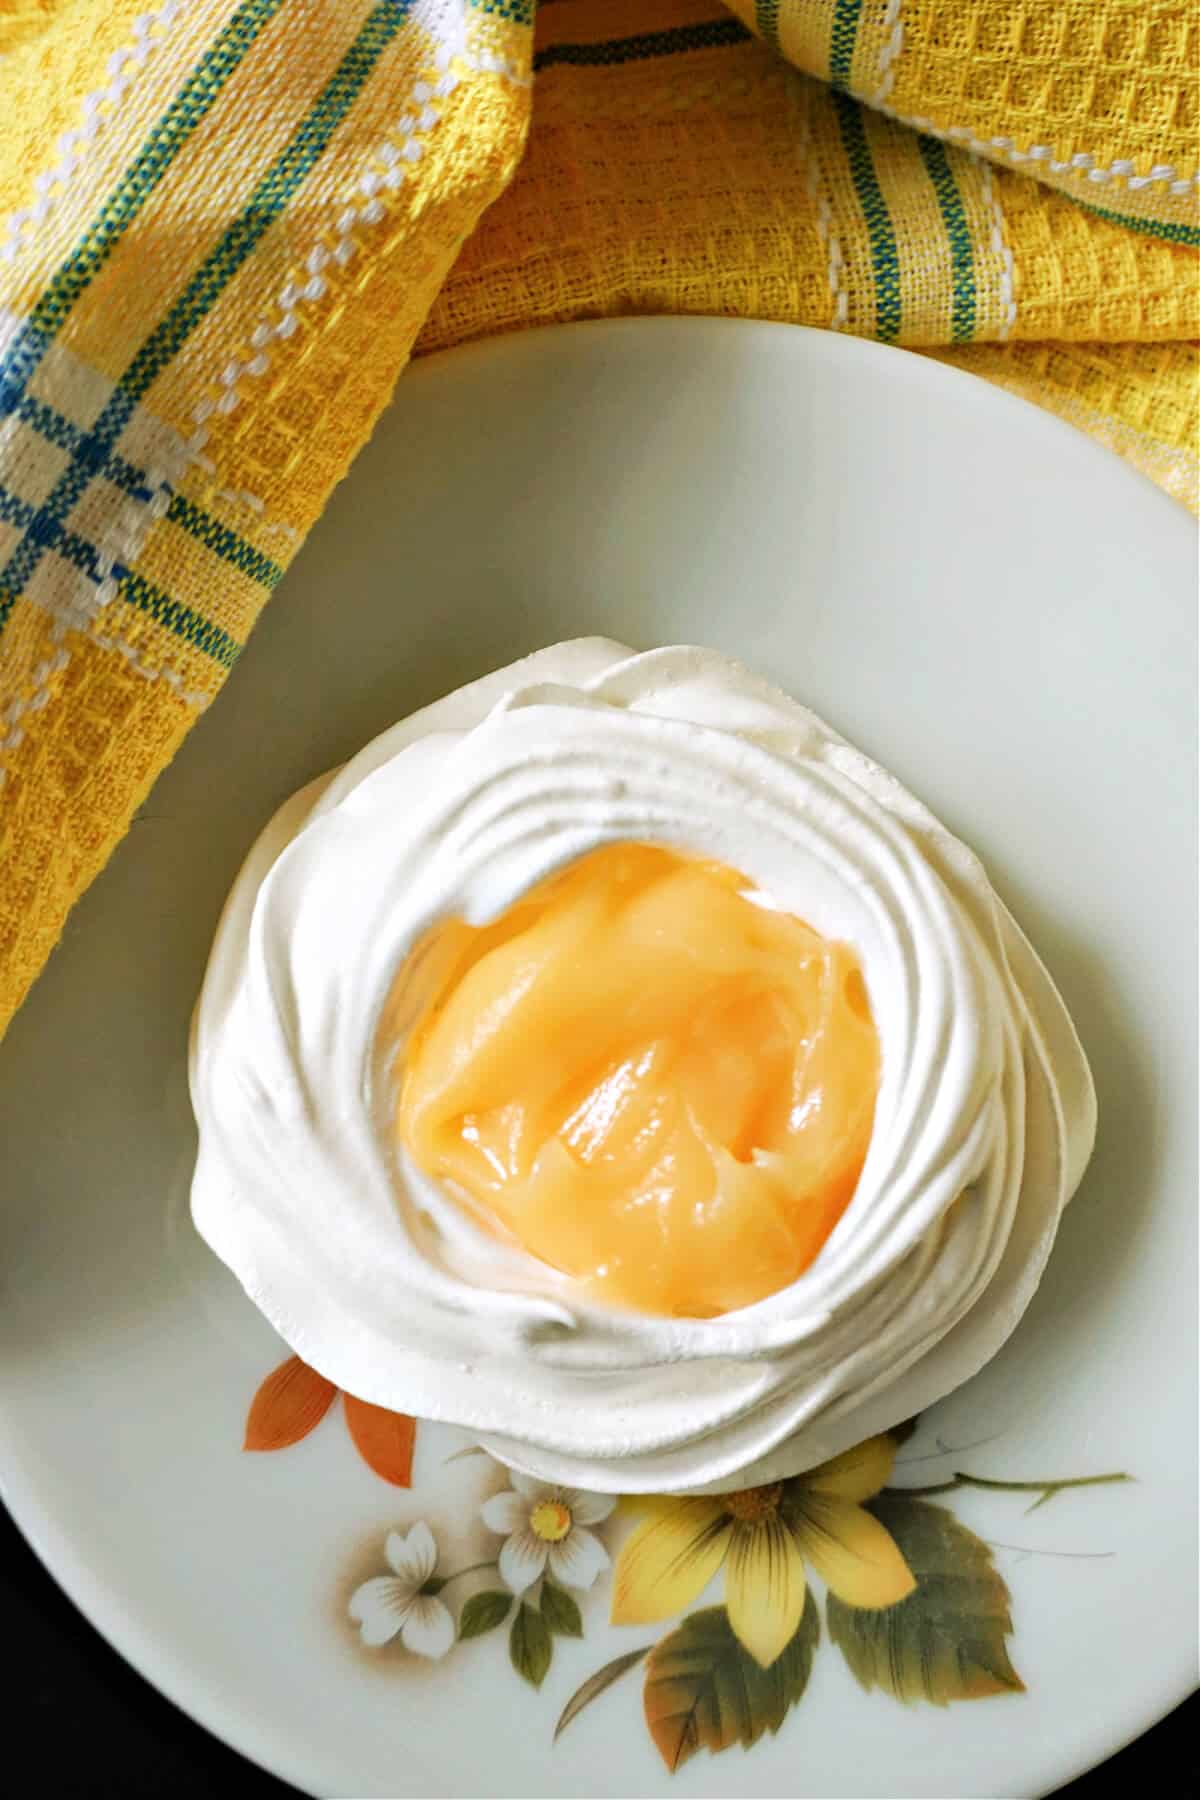 Overhead shoot of a meringue shell filled with lemon curd.